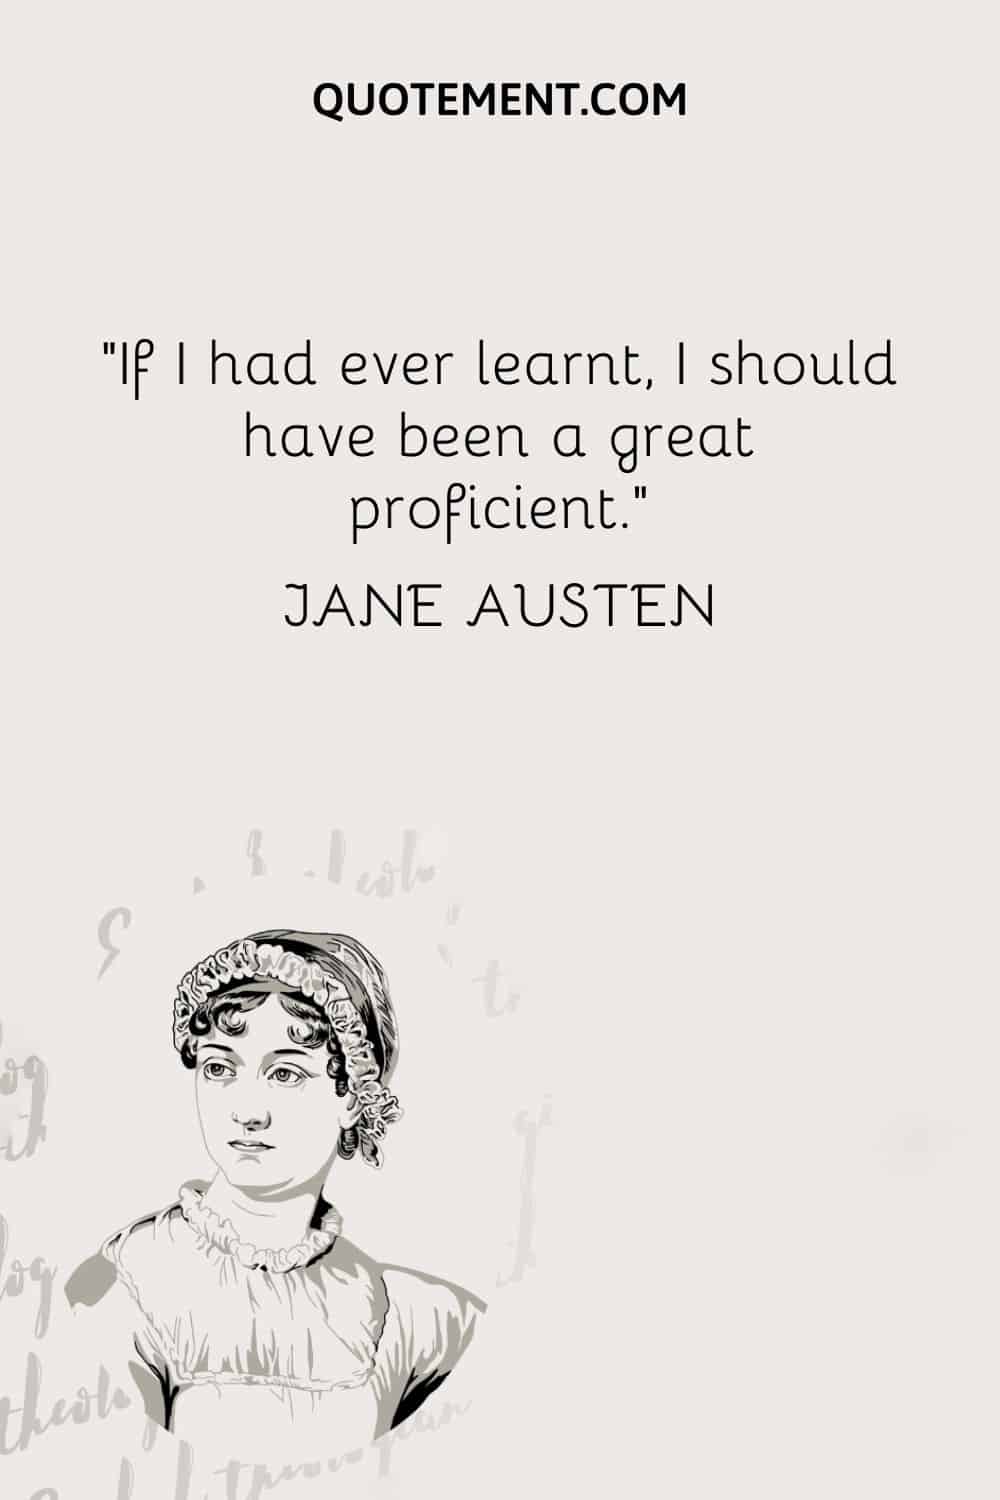 If I had ever learnt, I should have been a great proficient. — Jane Austen